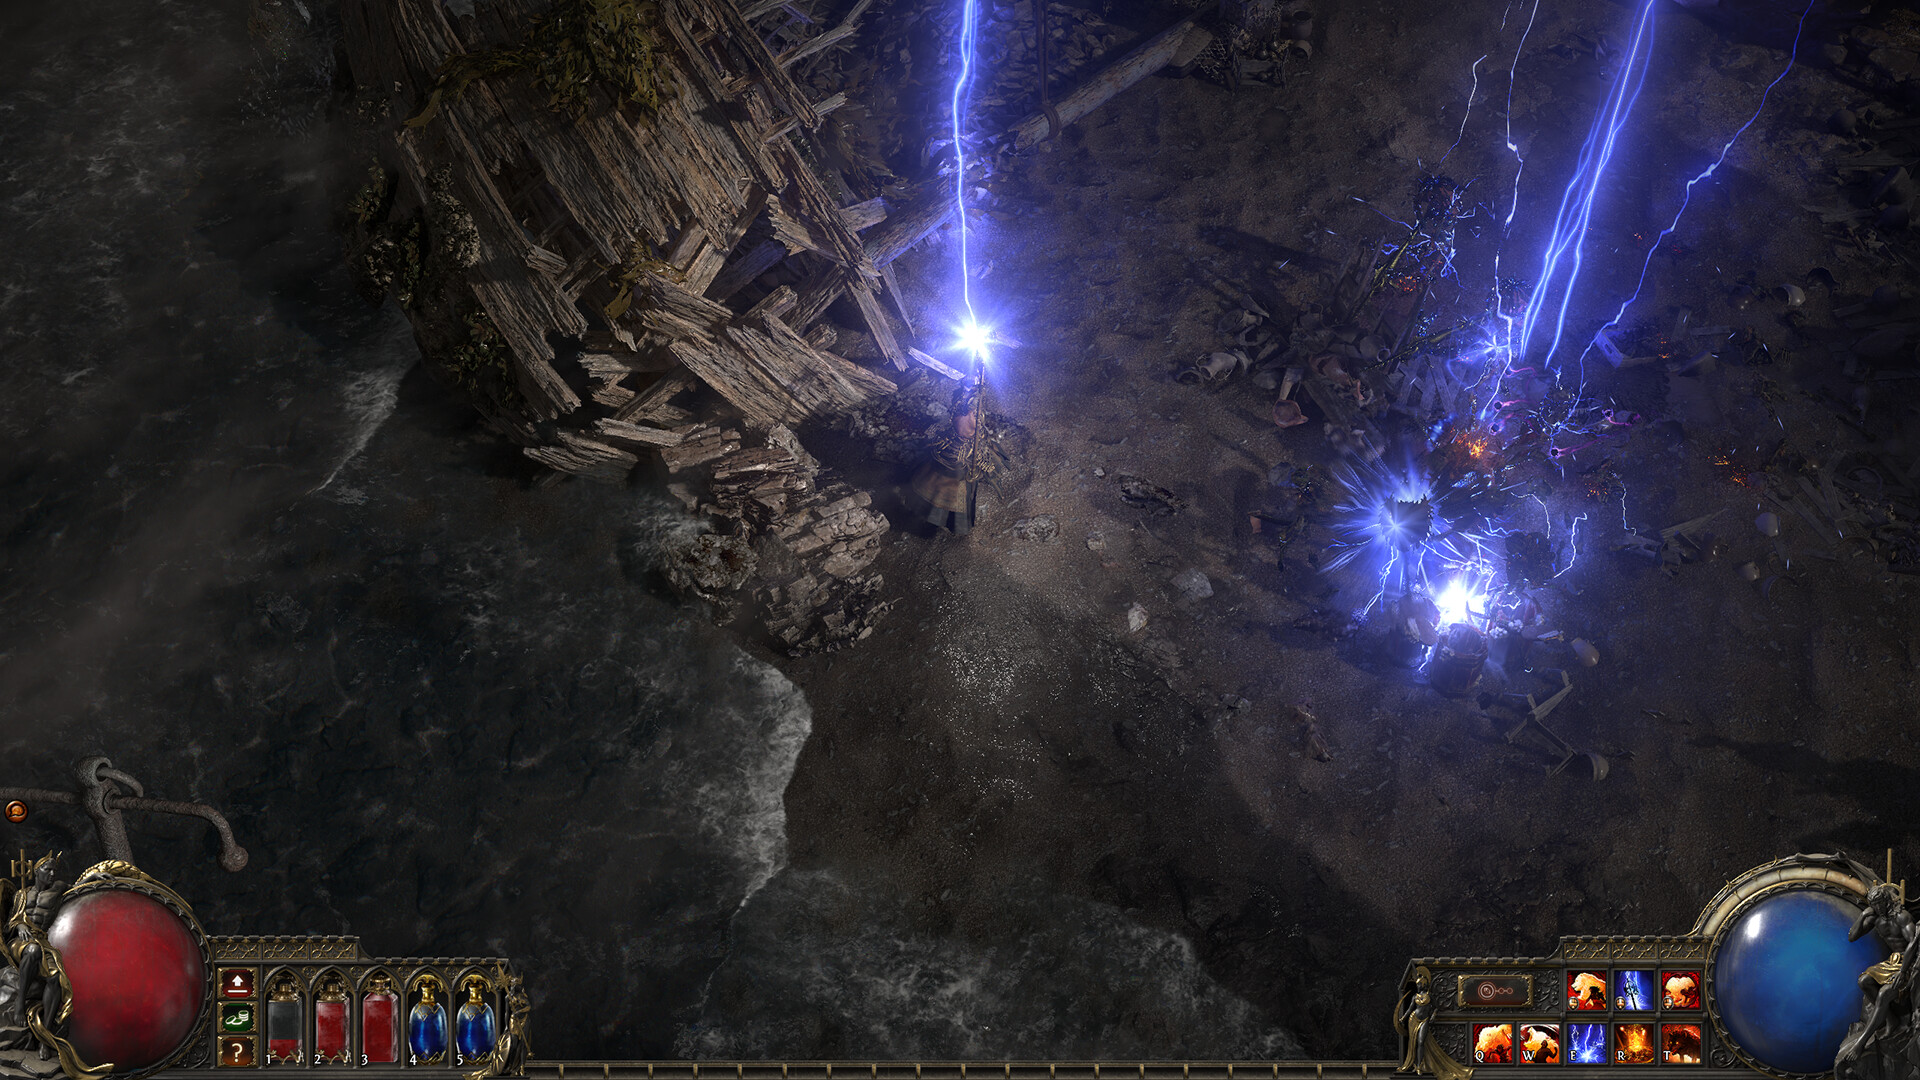 Path of Exile on Steam